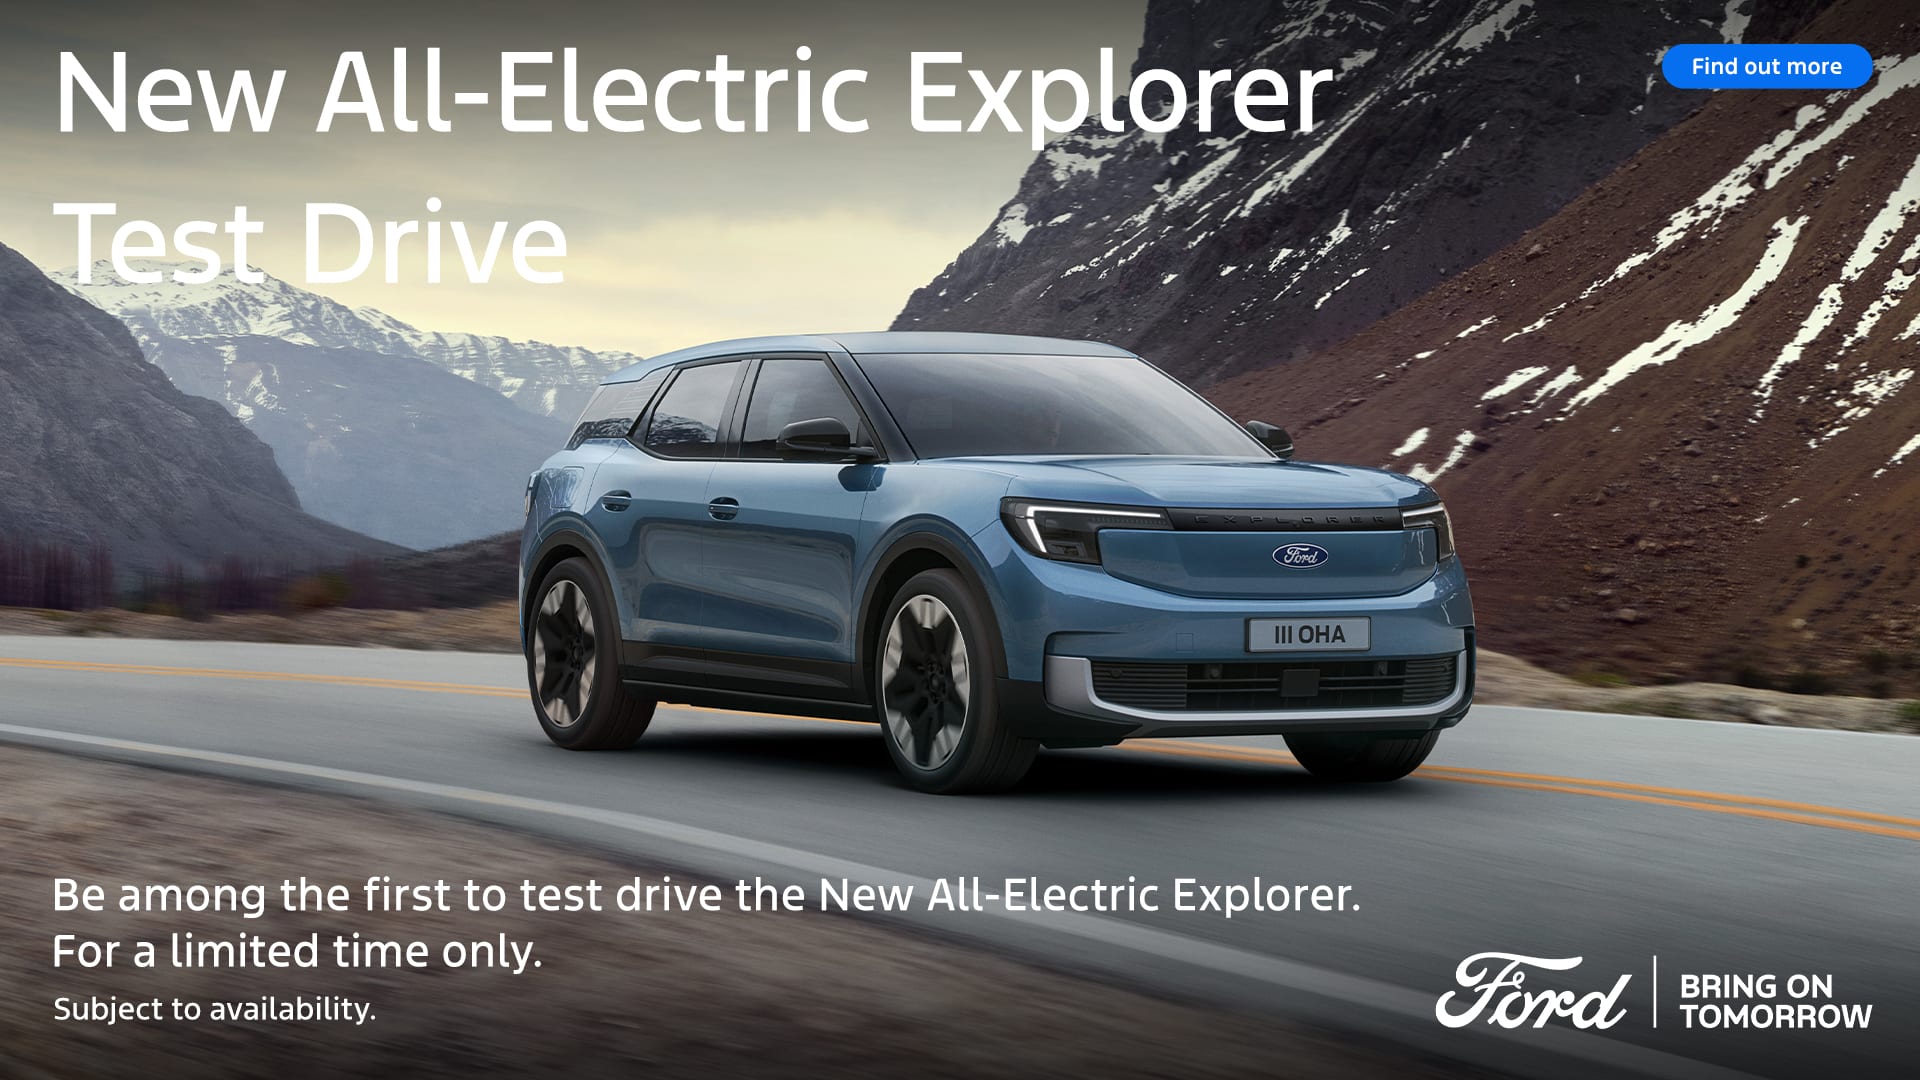 New All-Electric Ford Explorer offer